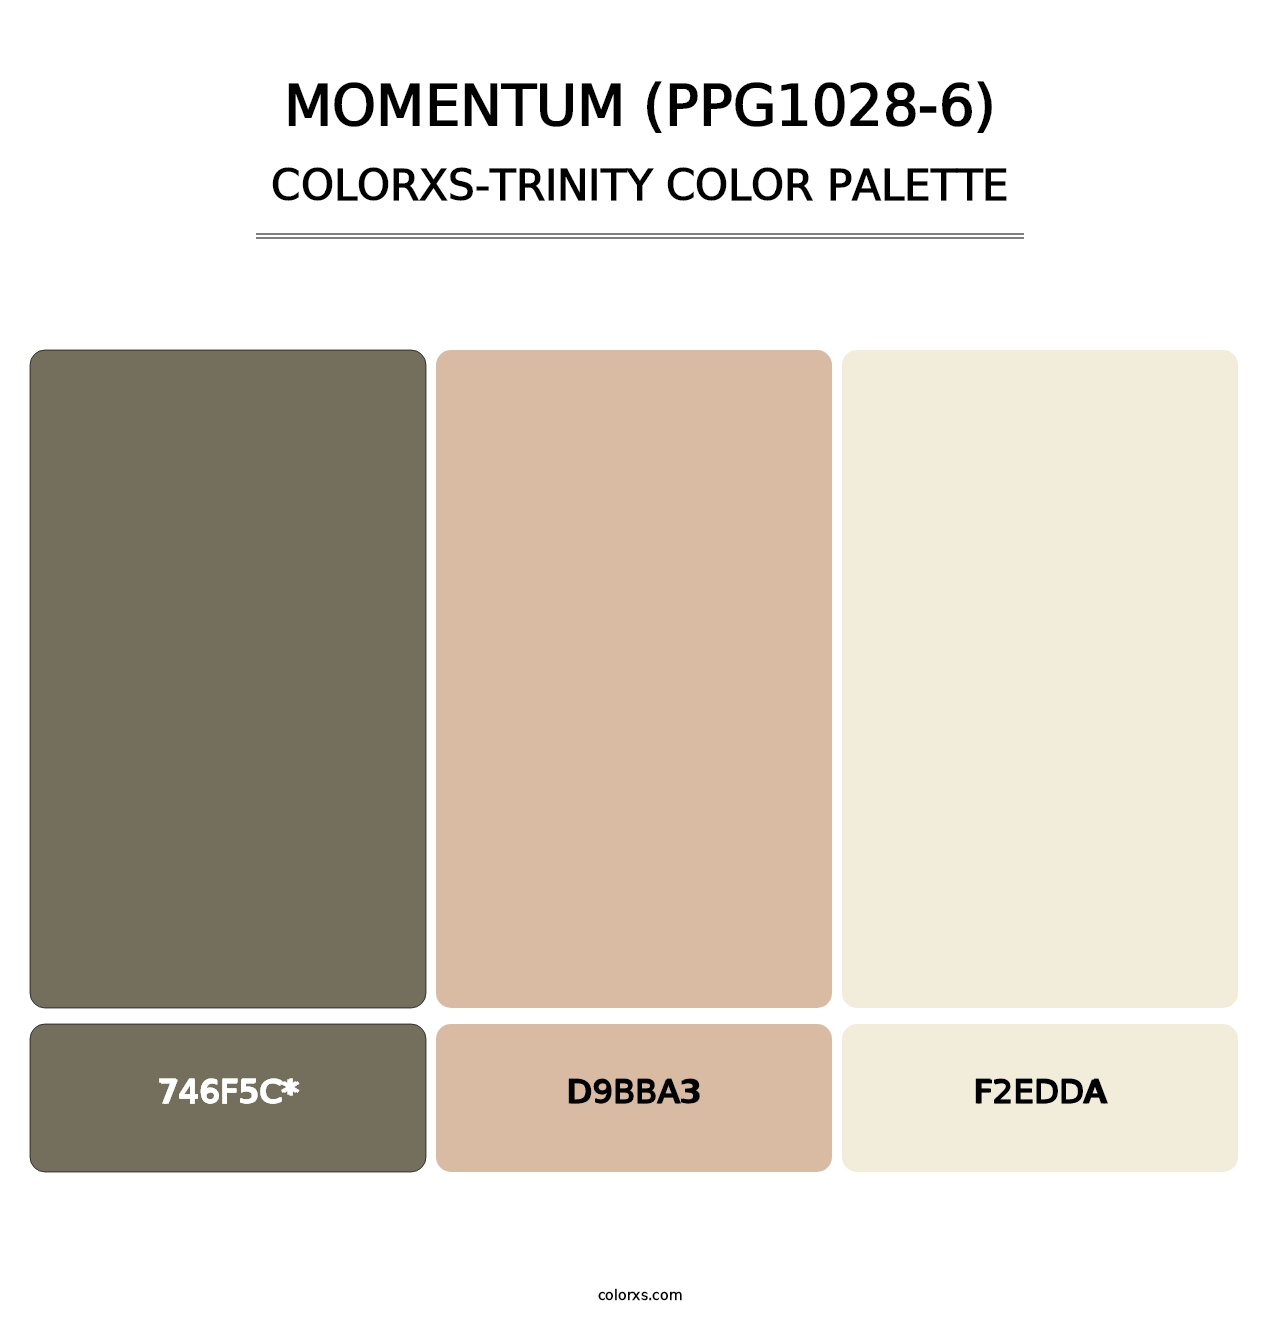 Momentum (PPG1028-6) - Colorxs Trinity Palette